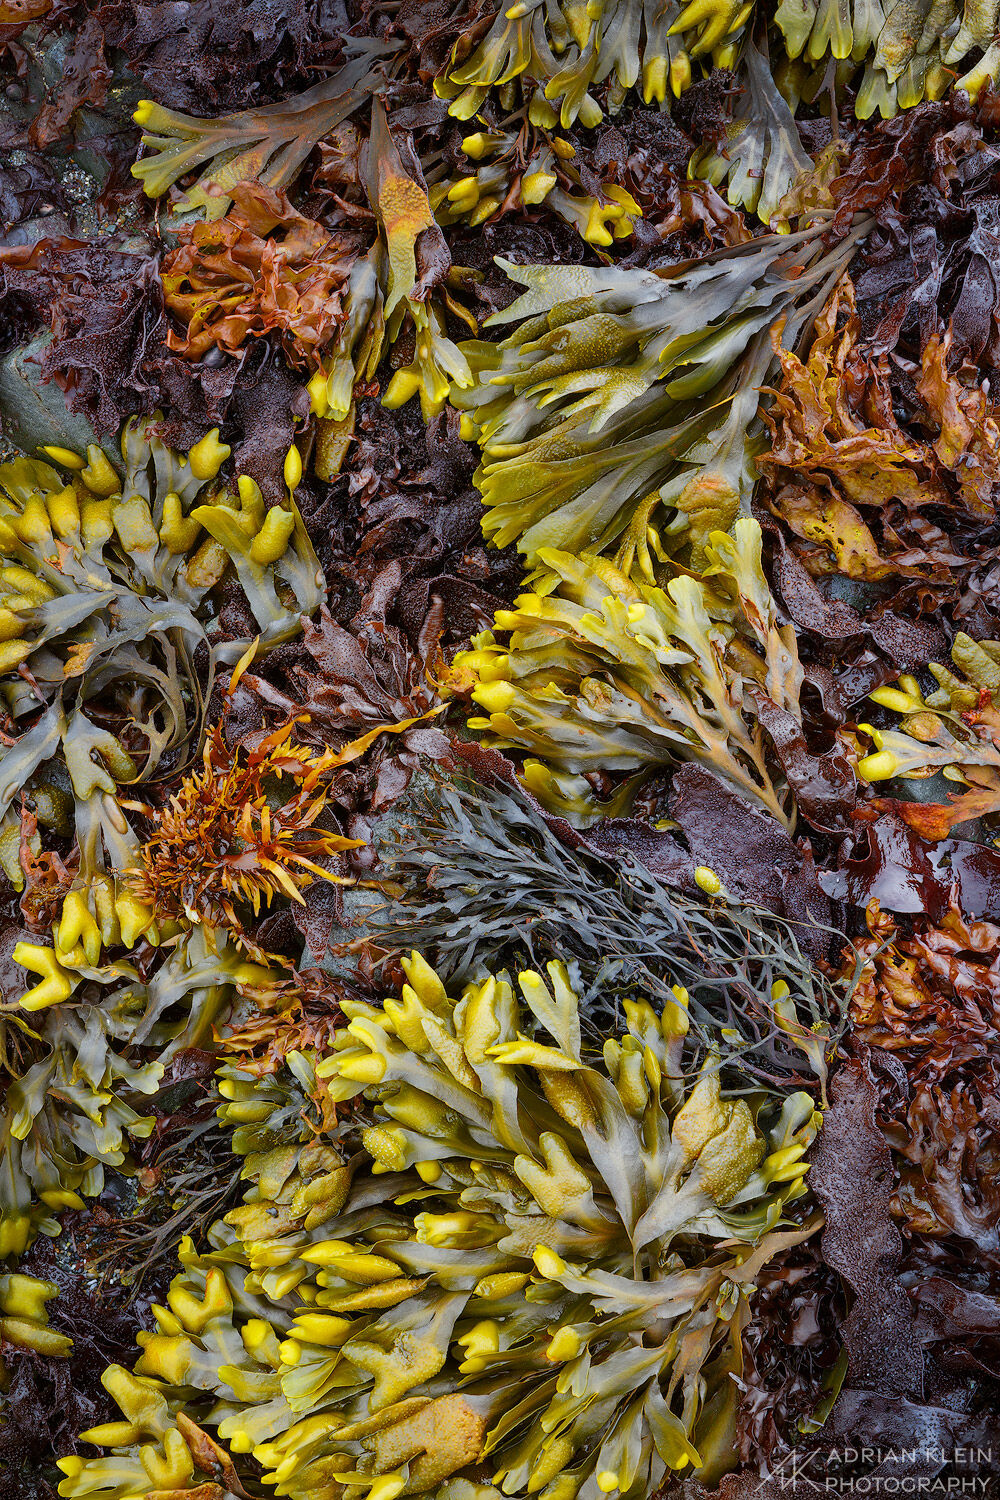 A beautiful mix of kelp and seaweed in nature color tones seen at low tide. North California Coast.